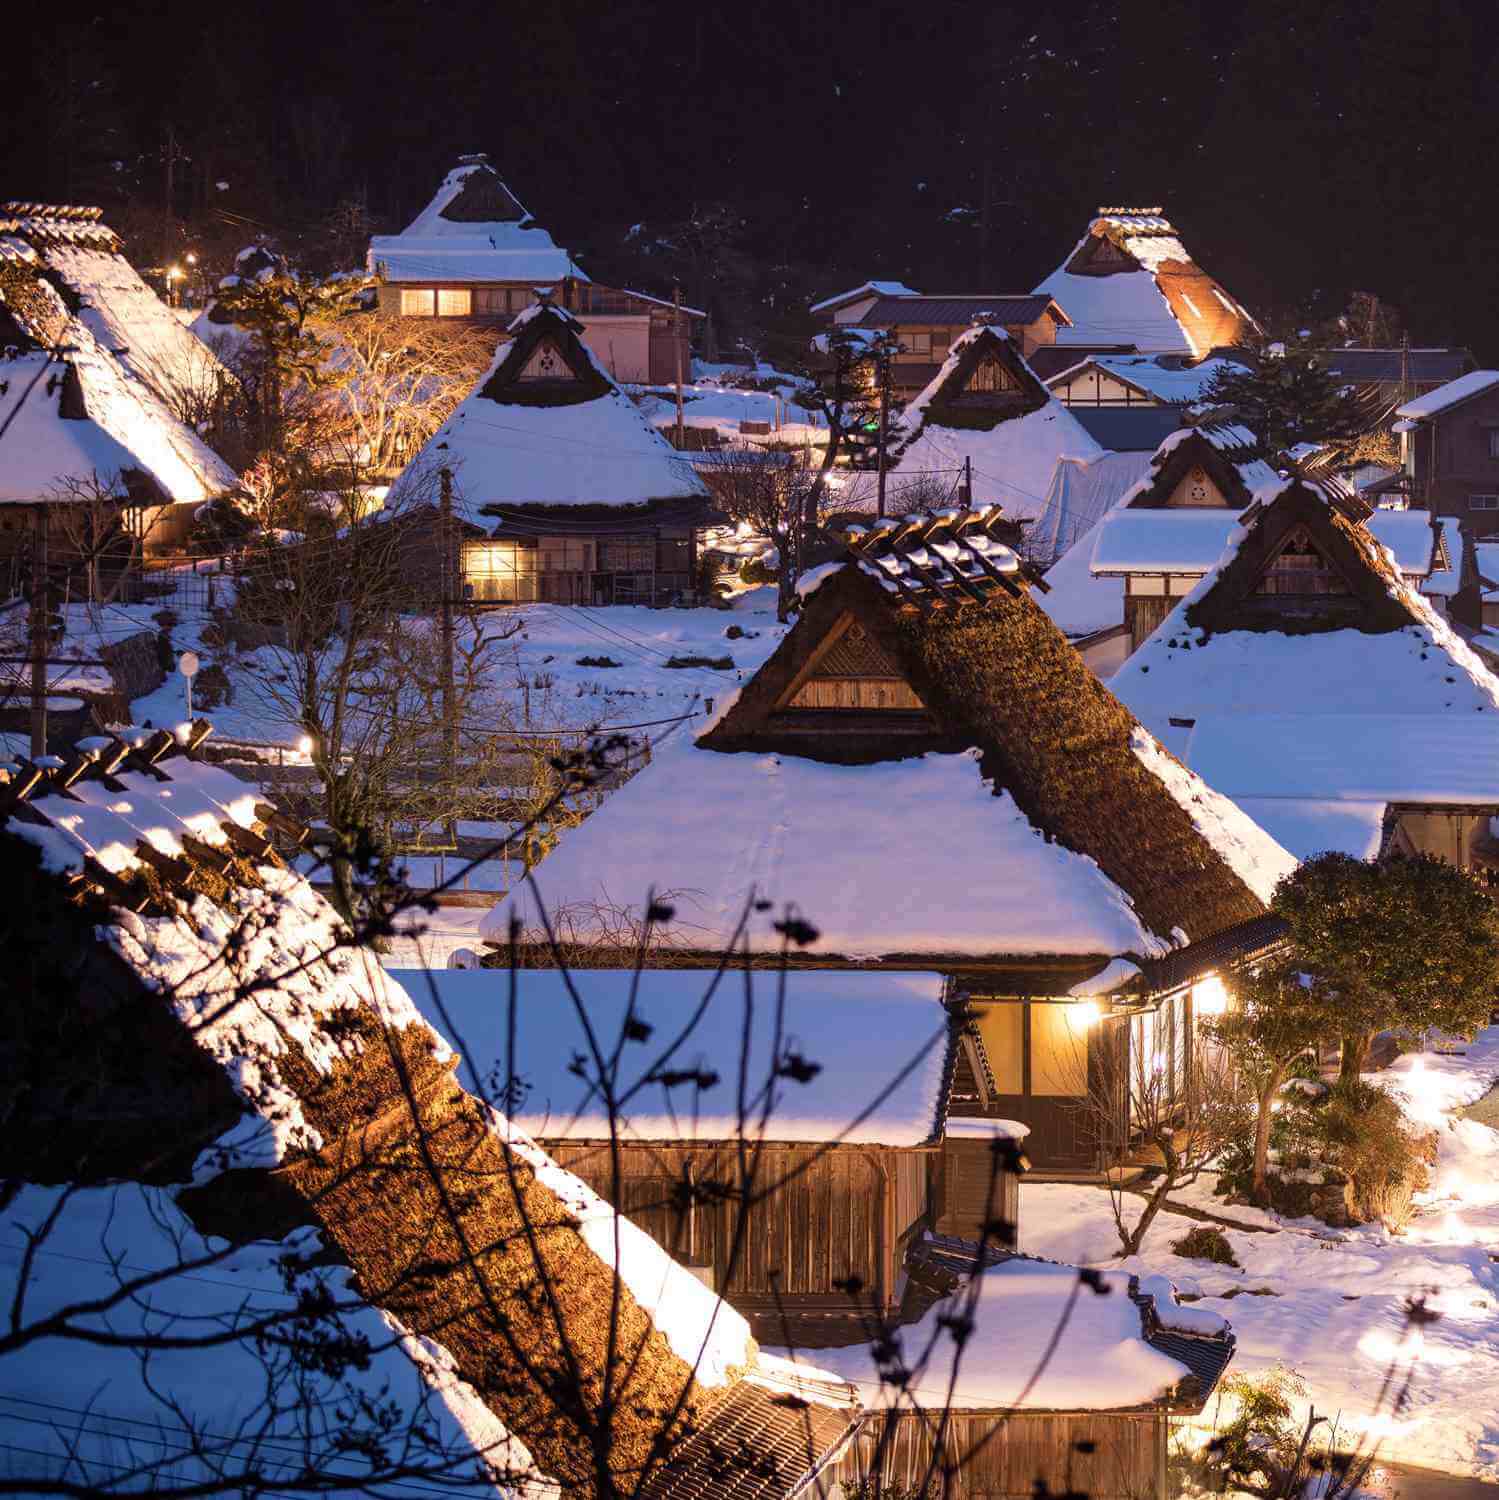 Photos of snow-covered villages8 Miyama